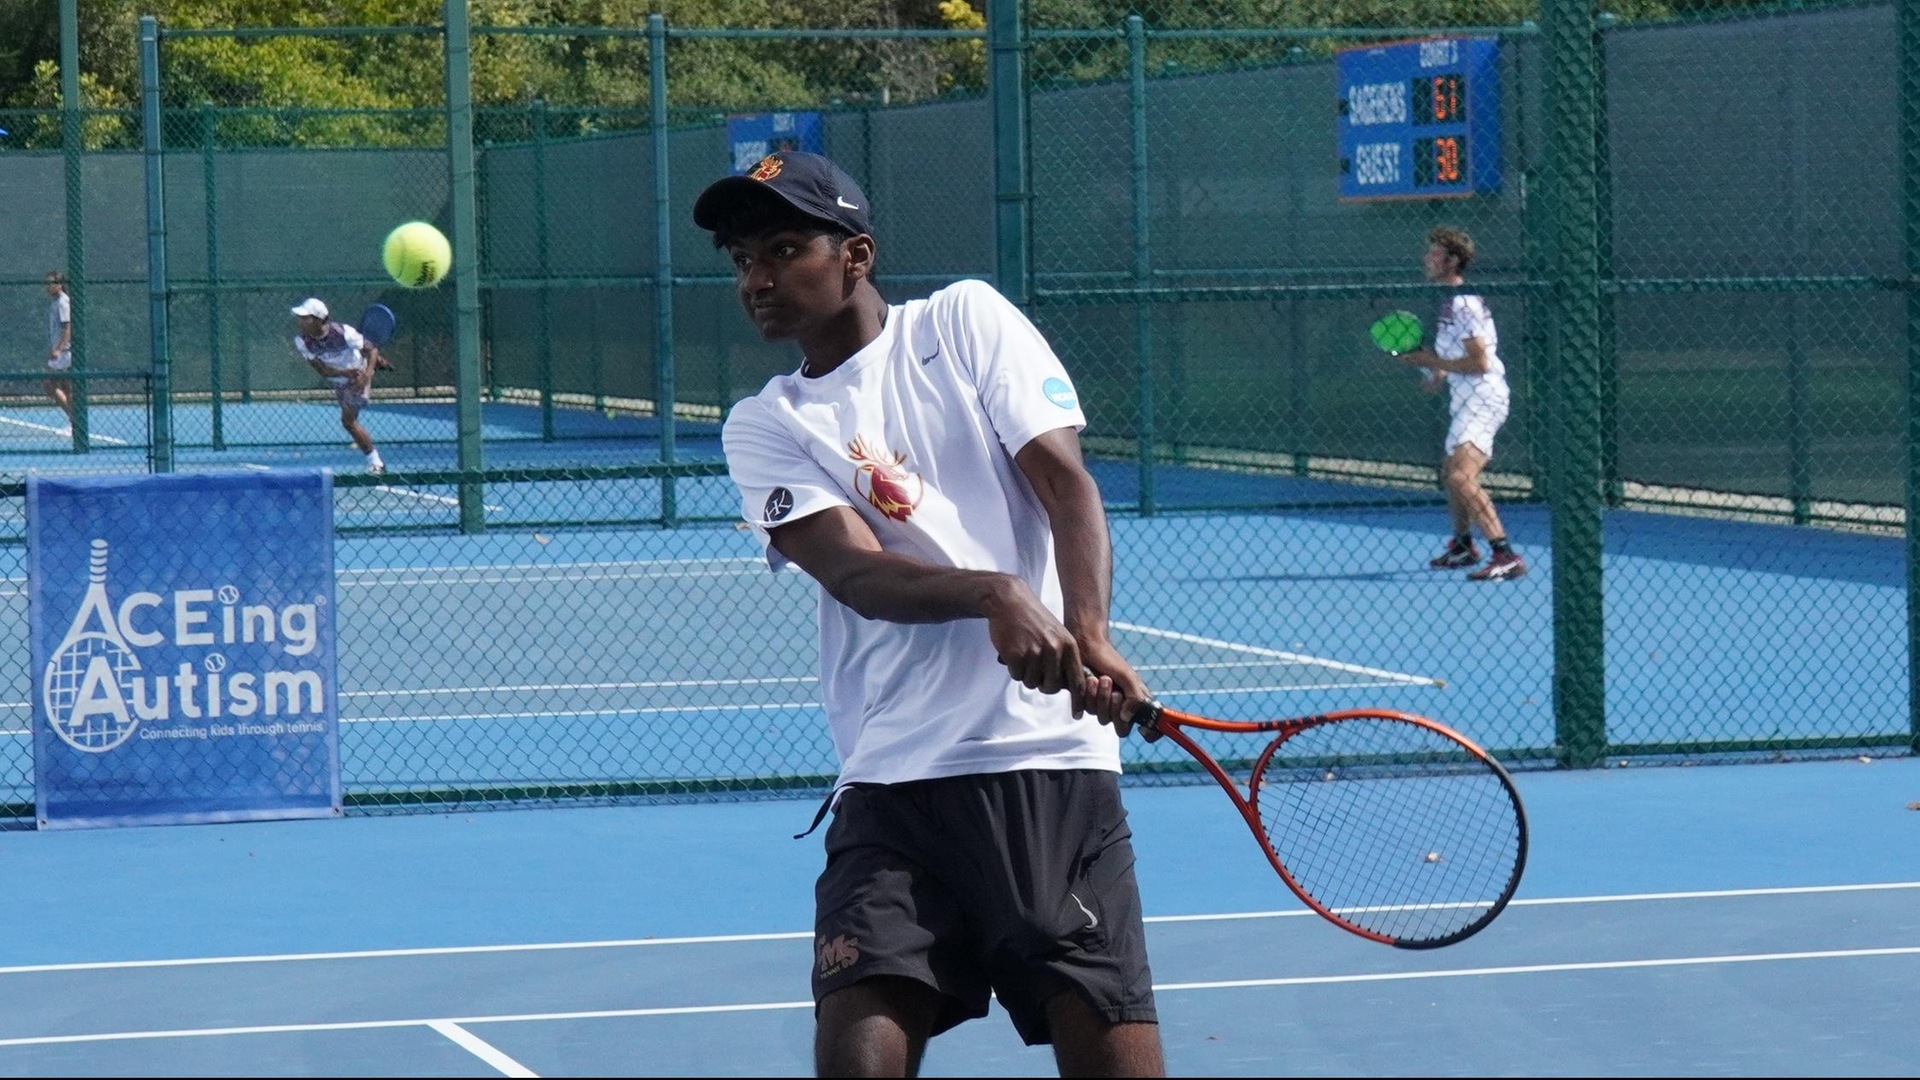 Advik Mareedu finished 6-2 in ITA Competition this year